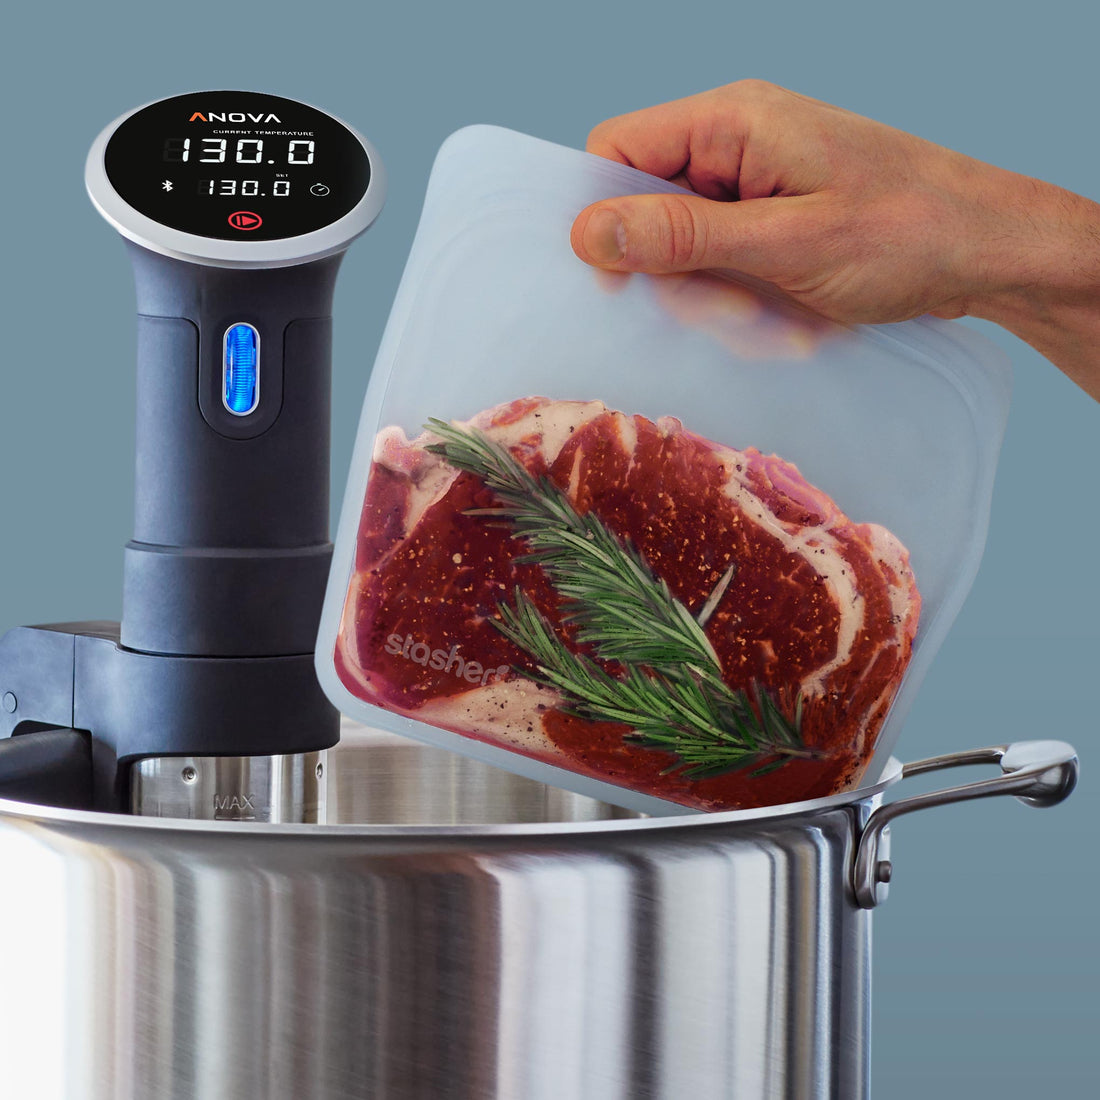 Anova unveils new reusable silicone bags to promote eco-friendly sous vide  cooking